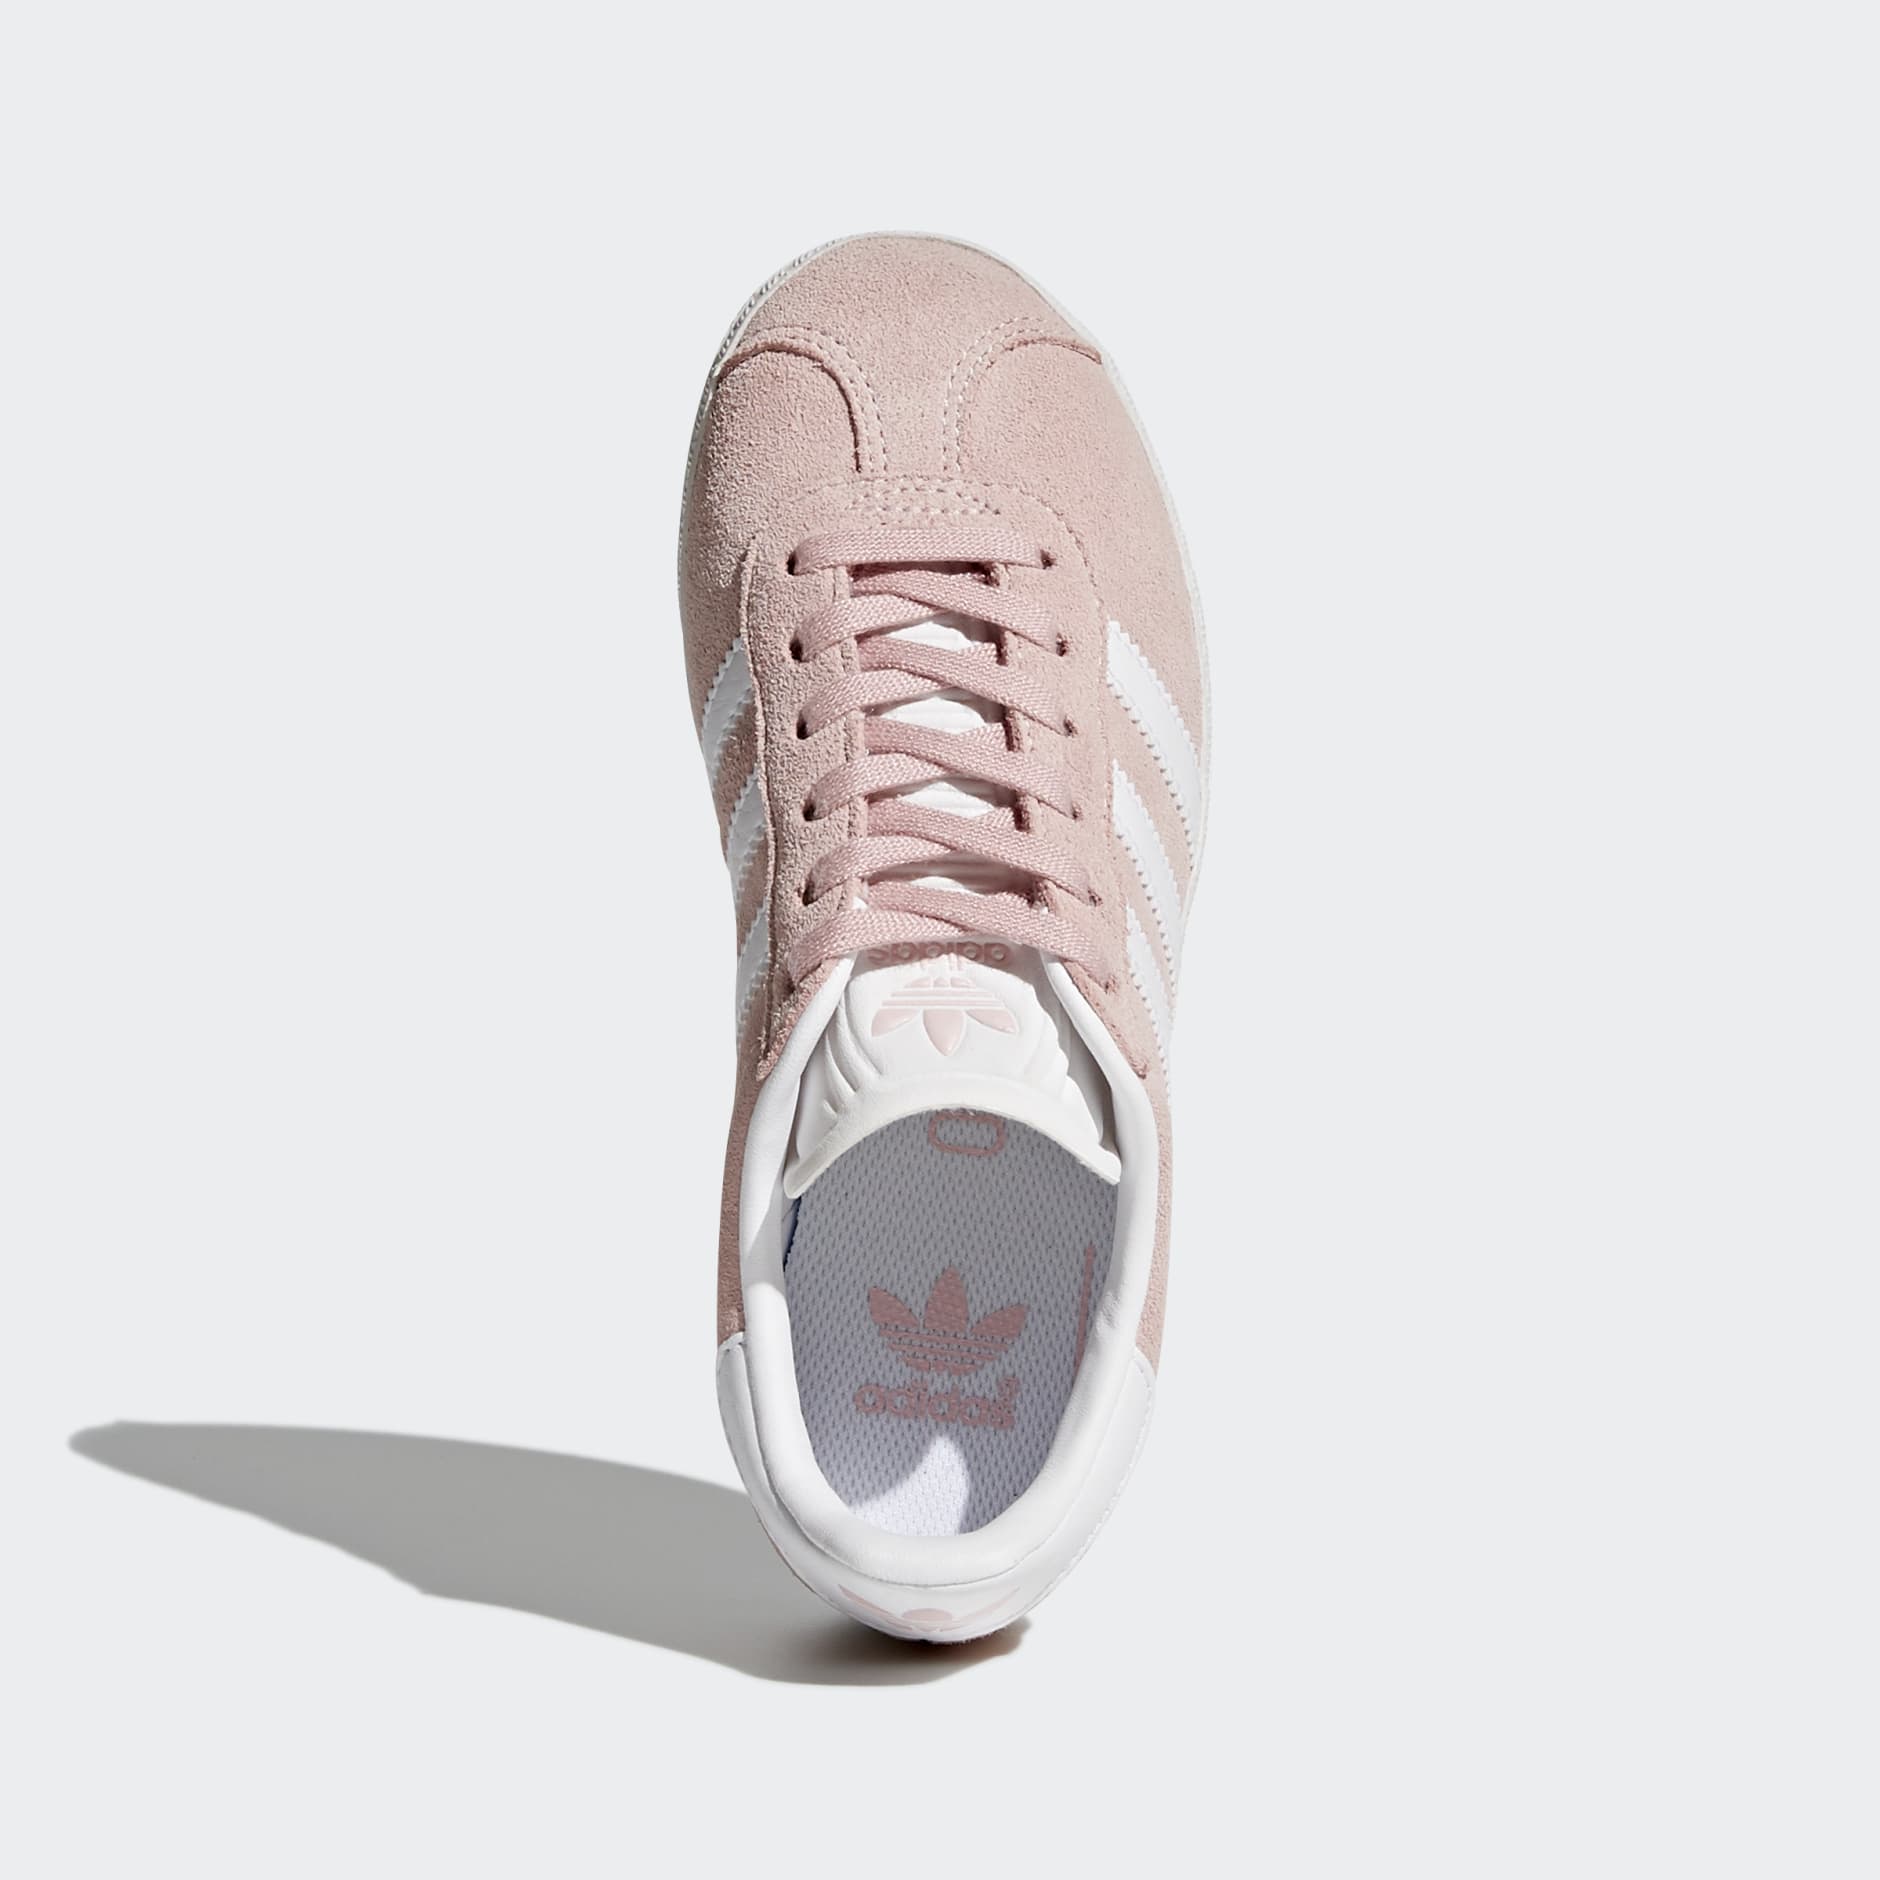 Shoes - Gazelle Shoes - Pink | adidas South Africa